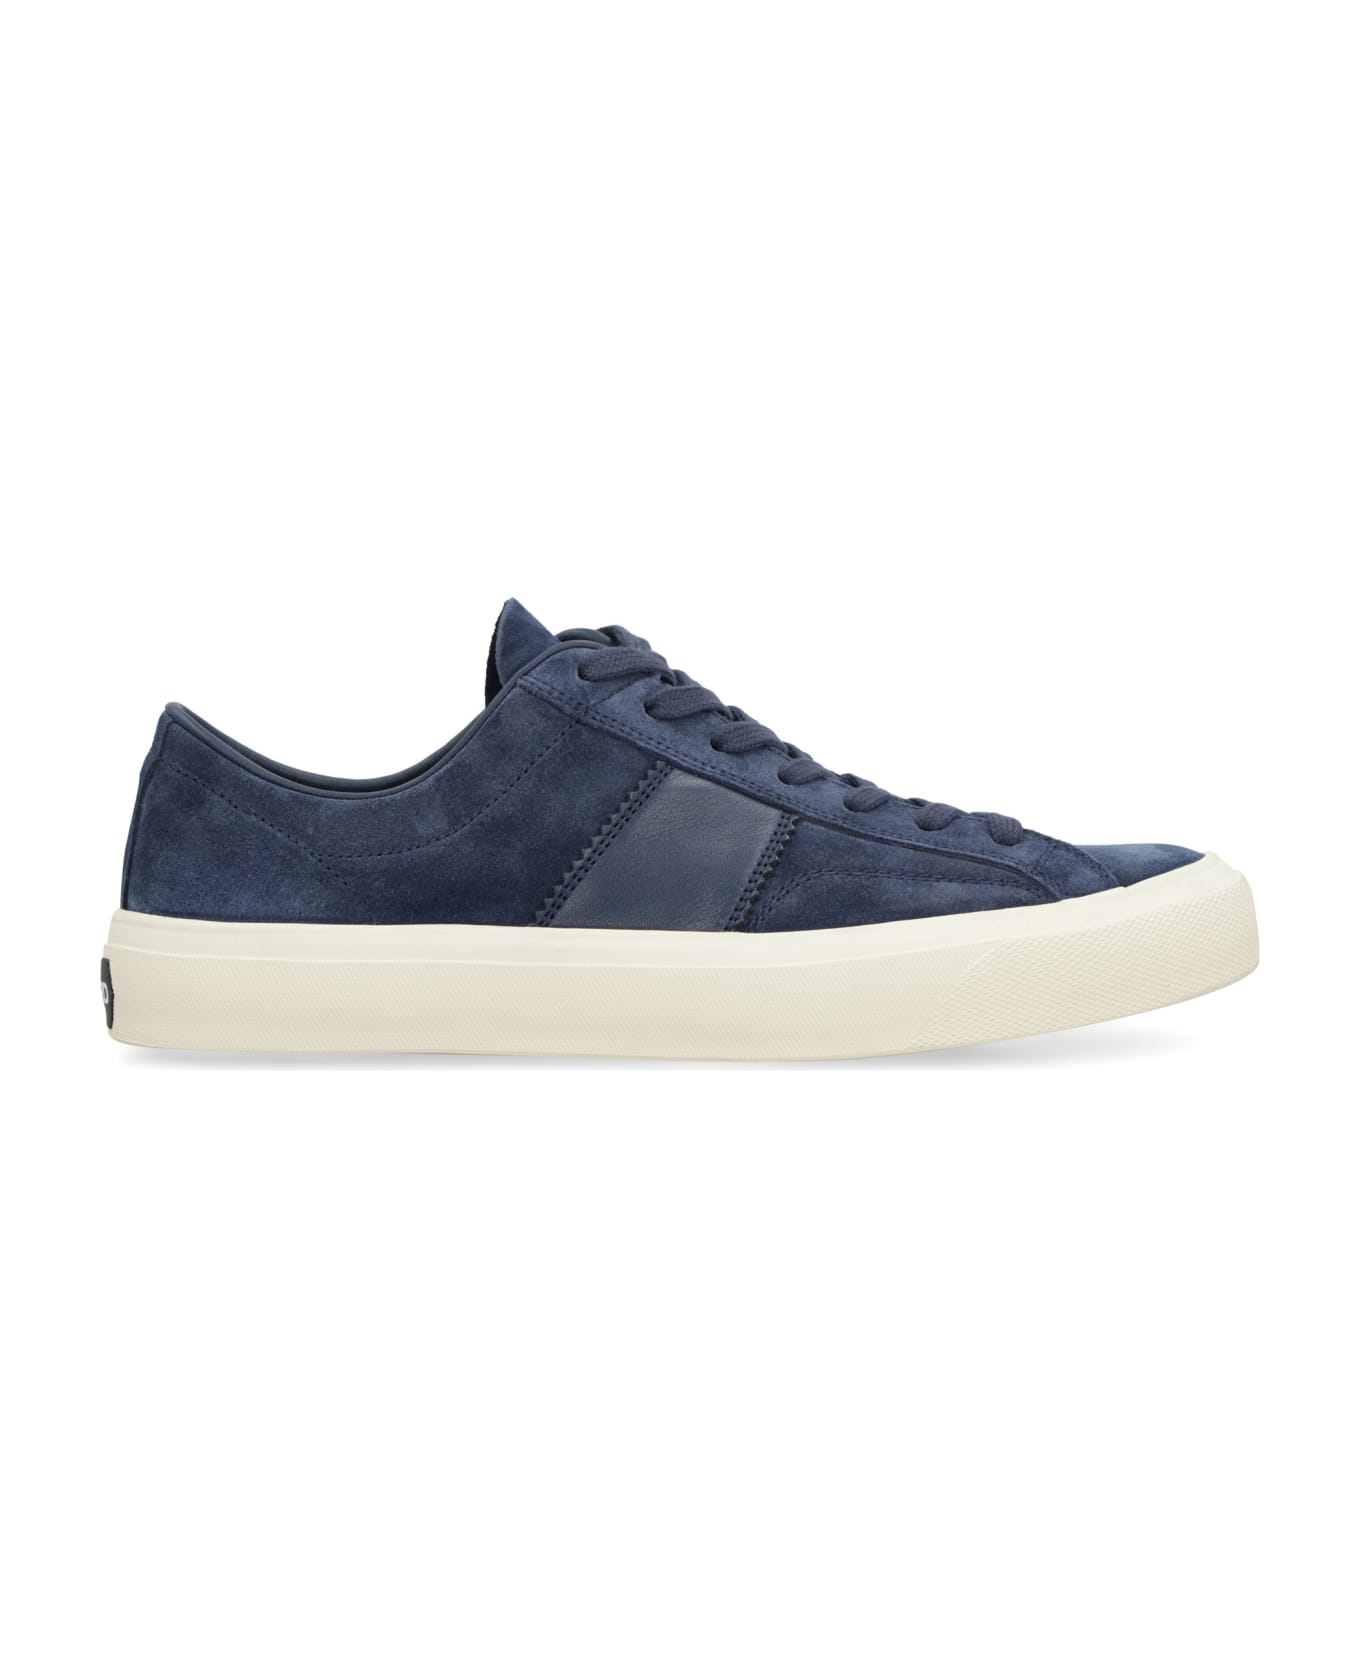 Tom Ford Cambridge Suede Sneakers - blue スニーカー